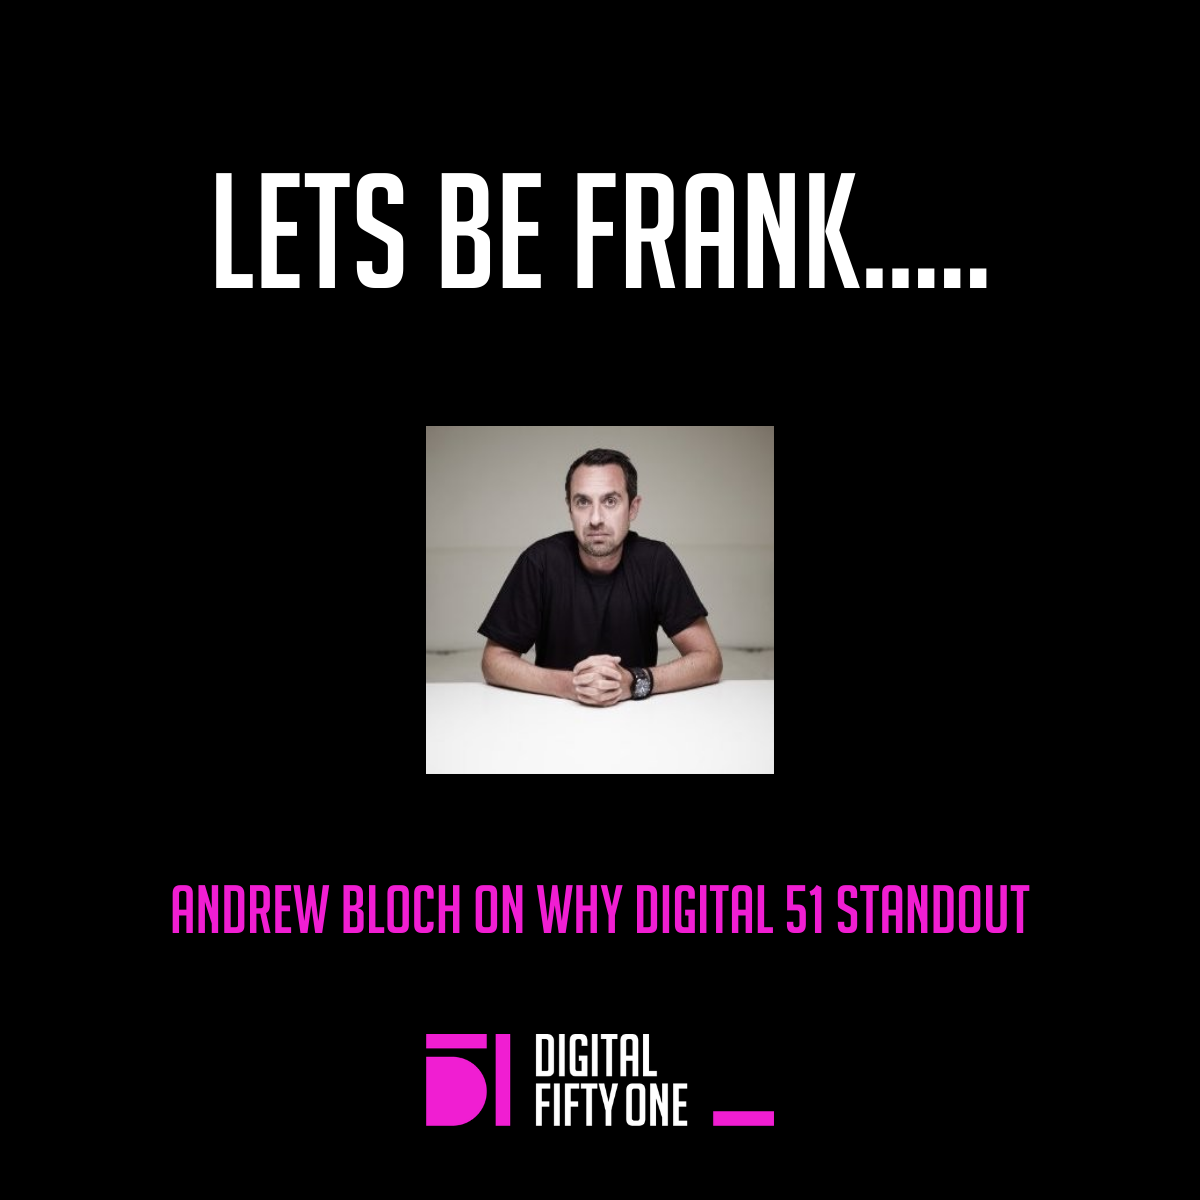 Andrew Bloch talks about why Digital 51 standout from the crowd